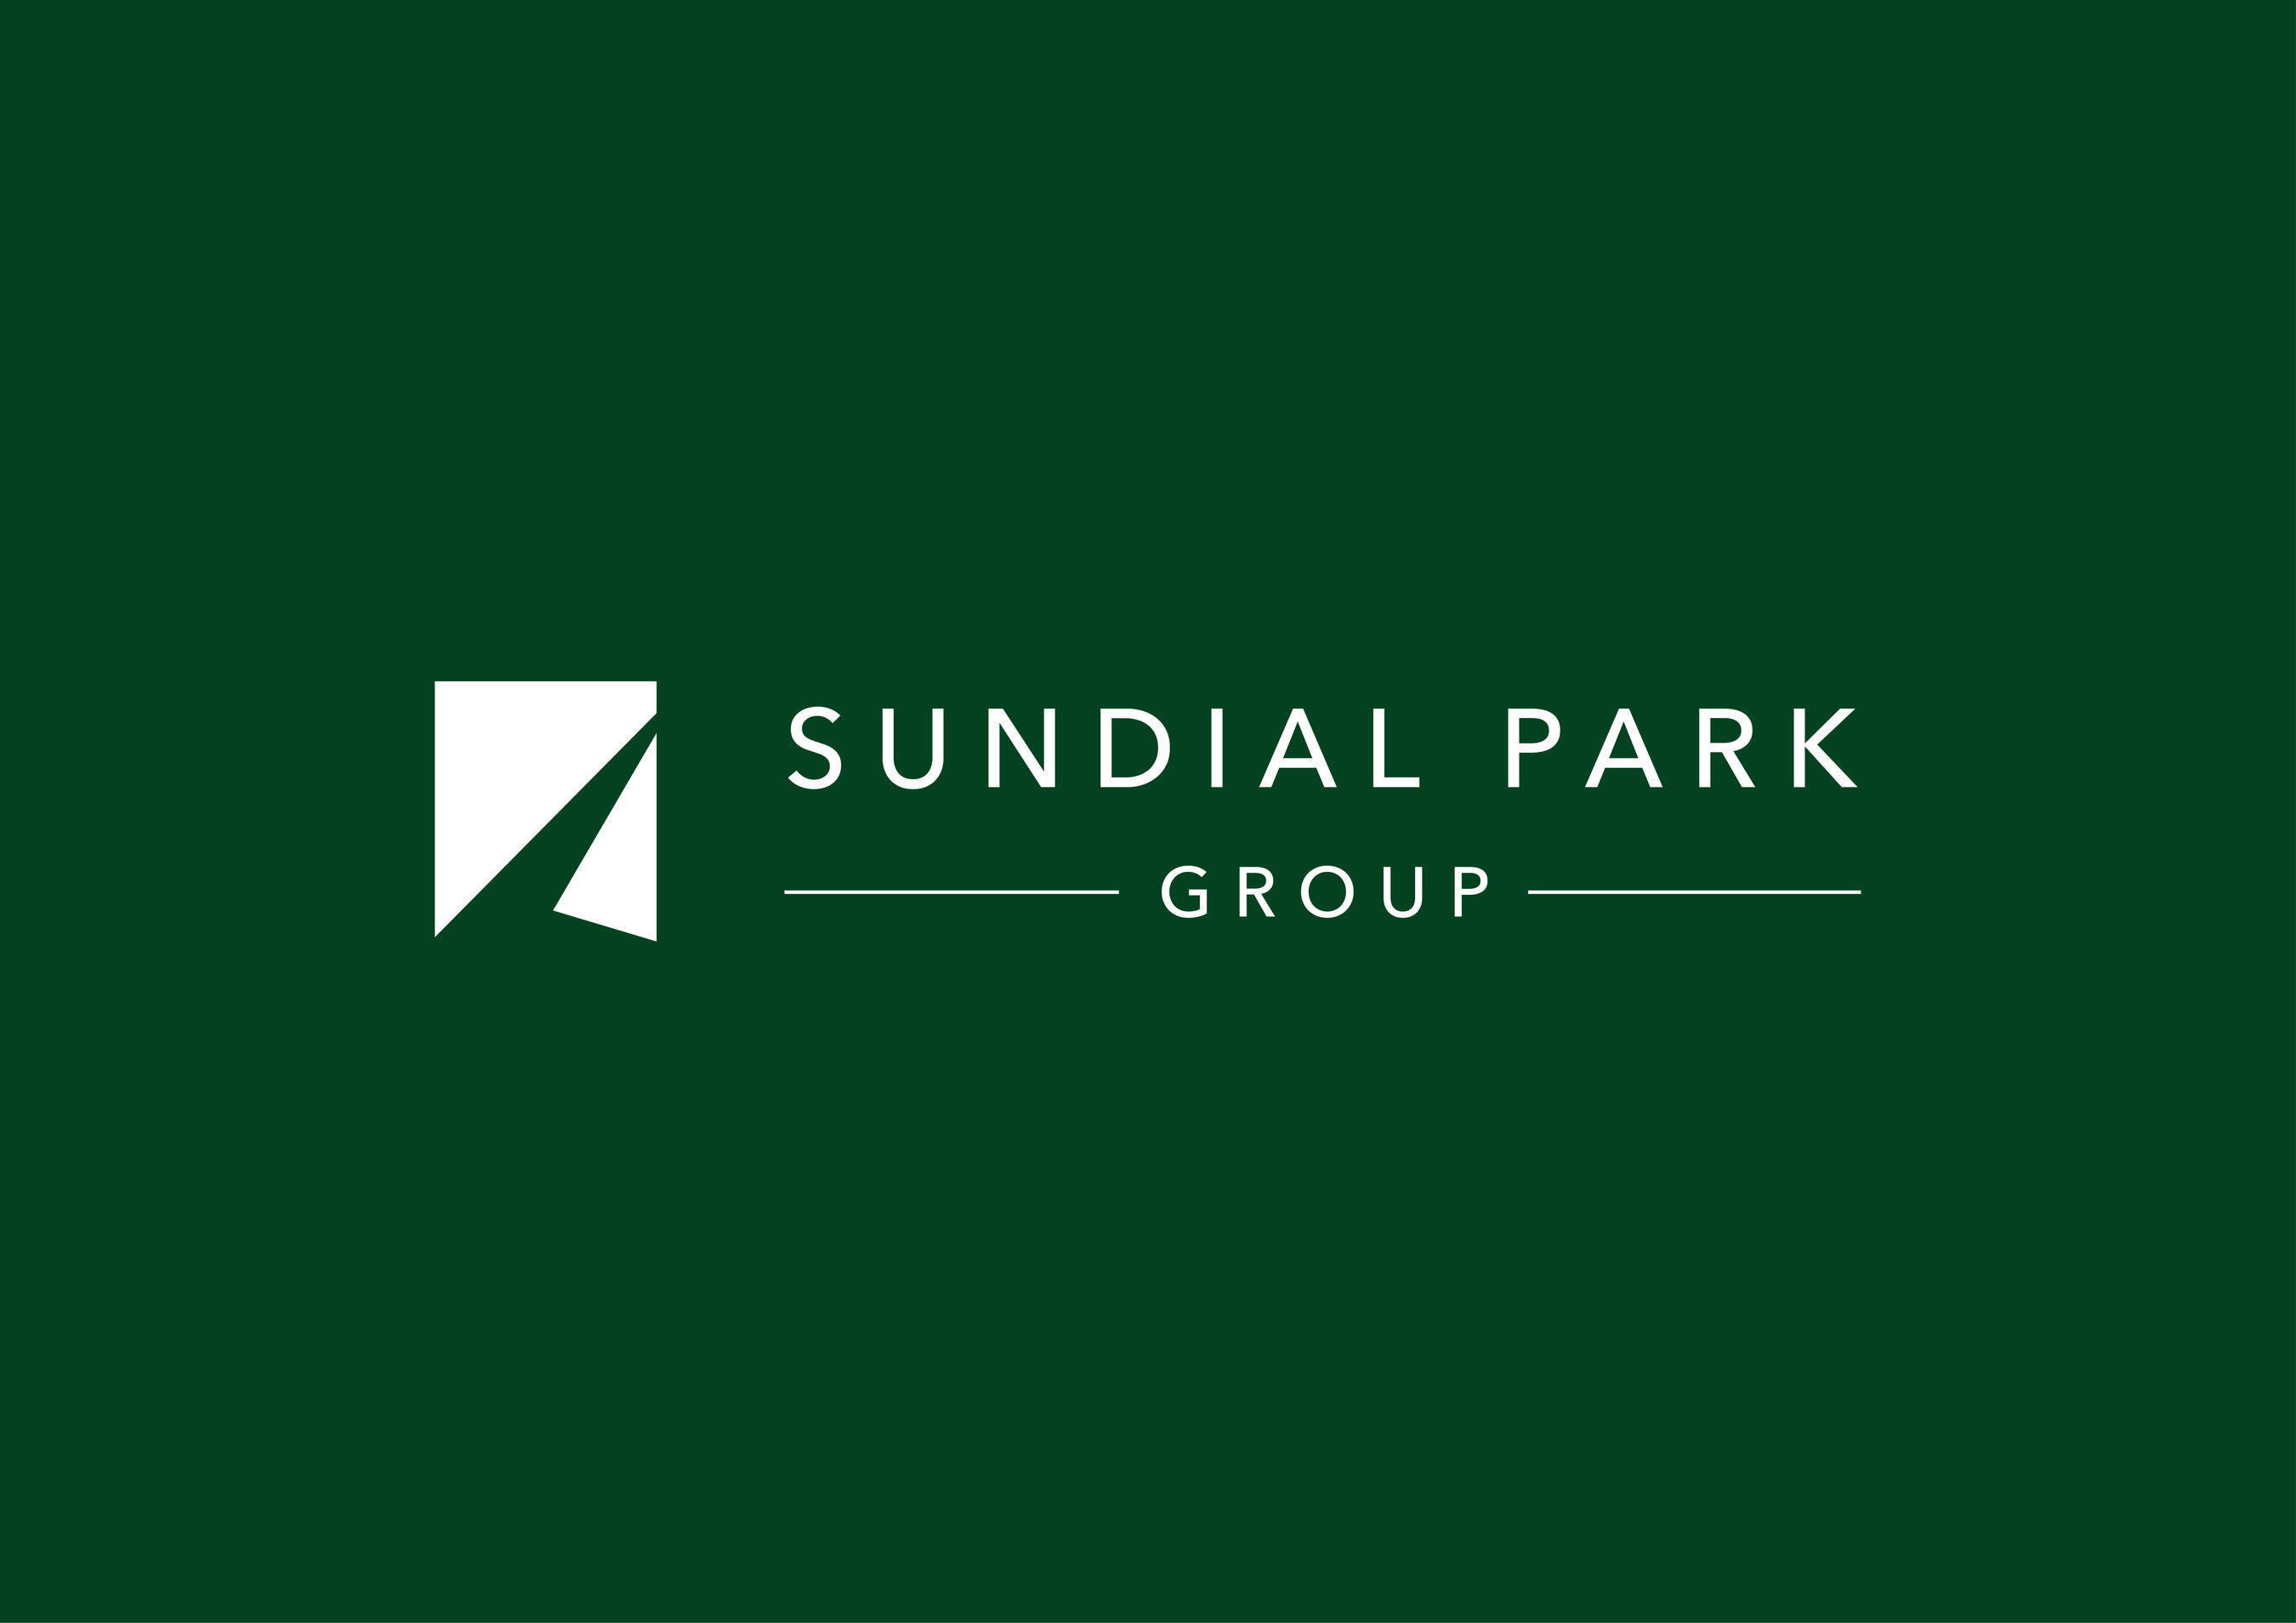 Sundial Park Group, a Private Equity Consulting Firm that advises managers on attracting institutional limited partners with best practices in capital formation, investor relations, and platform strategies to build enduring firms. Sundial Park Group’s unique approach addresses the challenges managers face in building these diverse capabilities to meet the evolving needs of institutional investors.